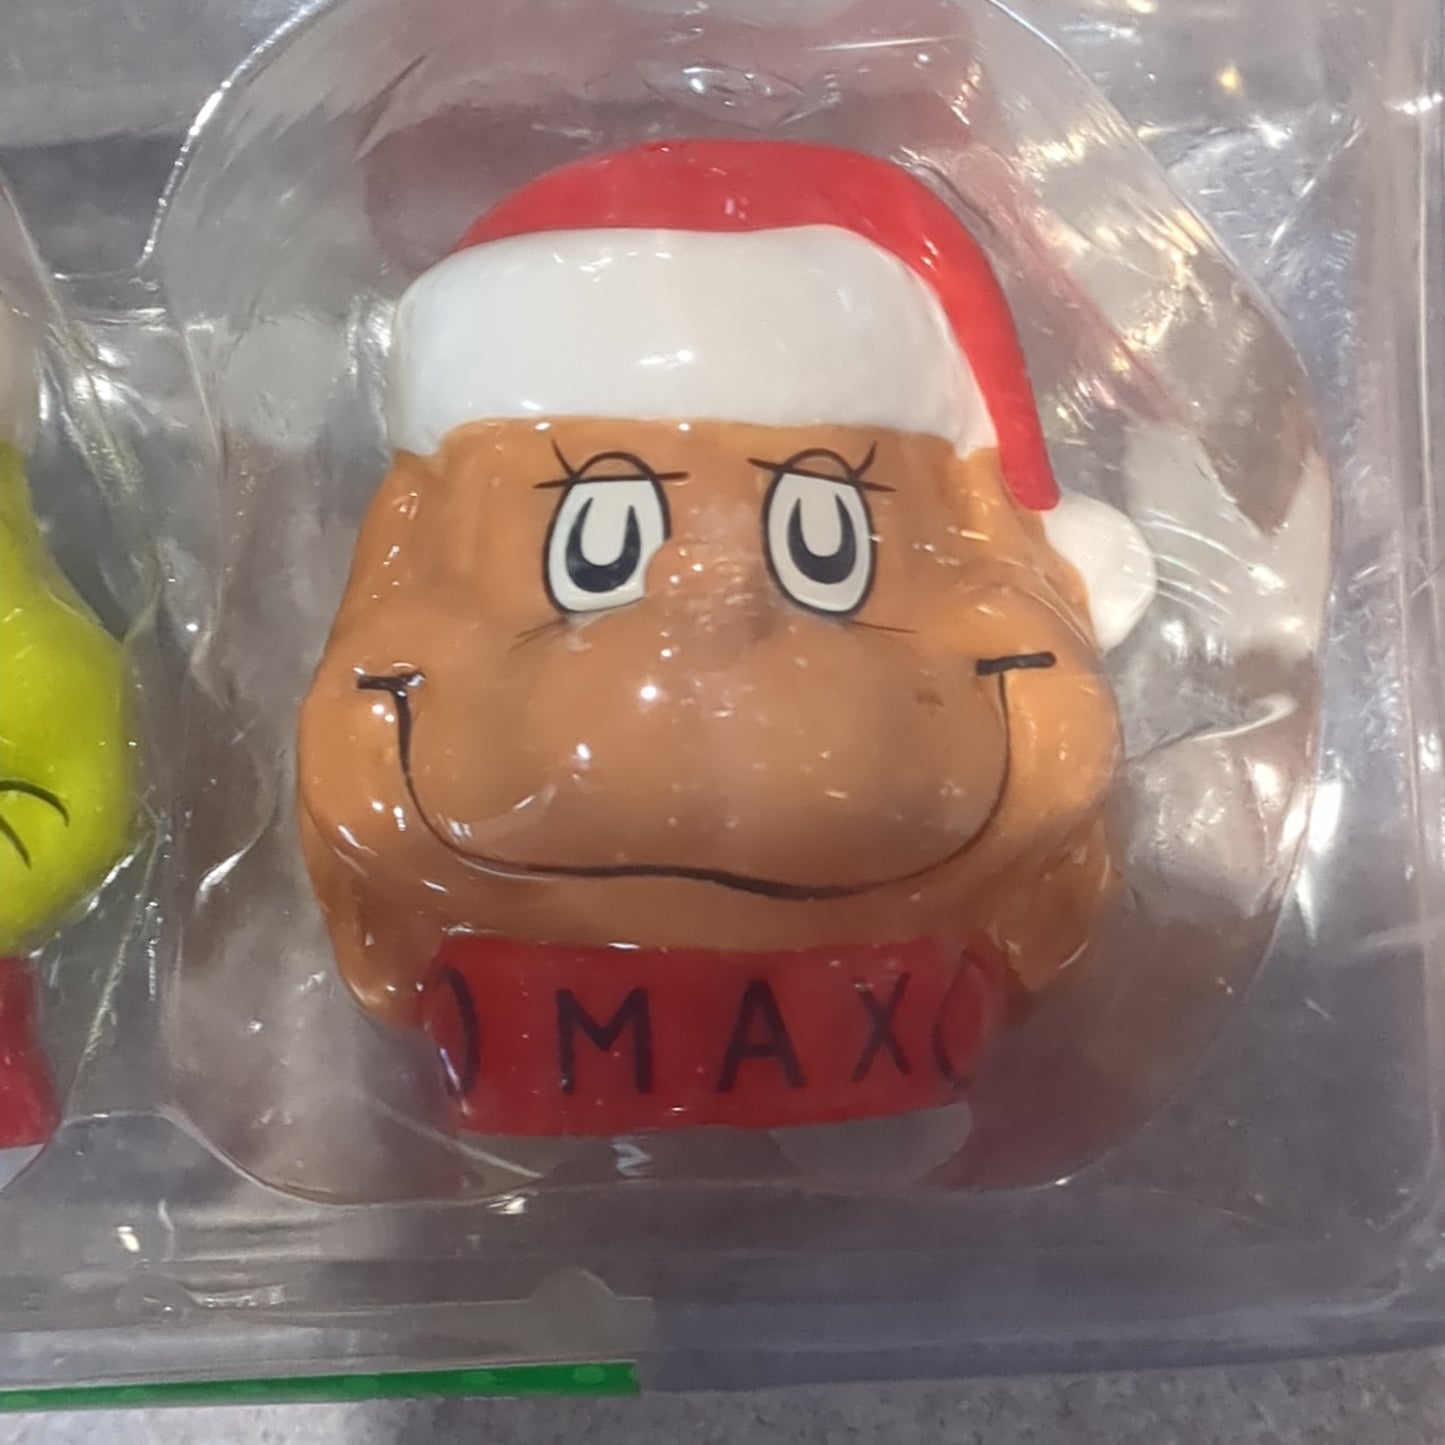 Grinch and Max salt and pepper shaker set